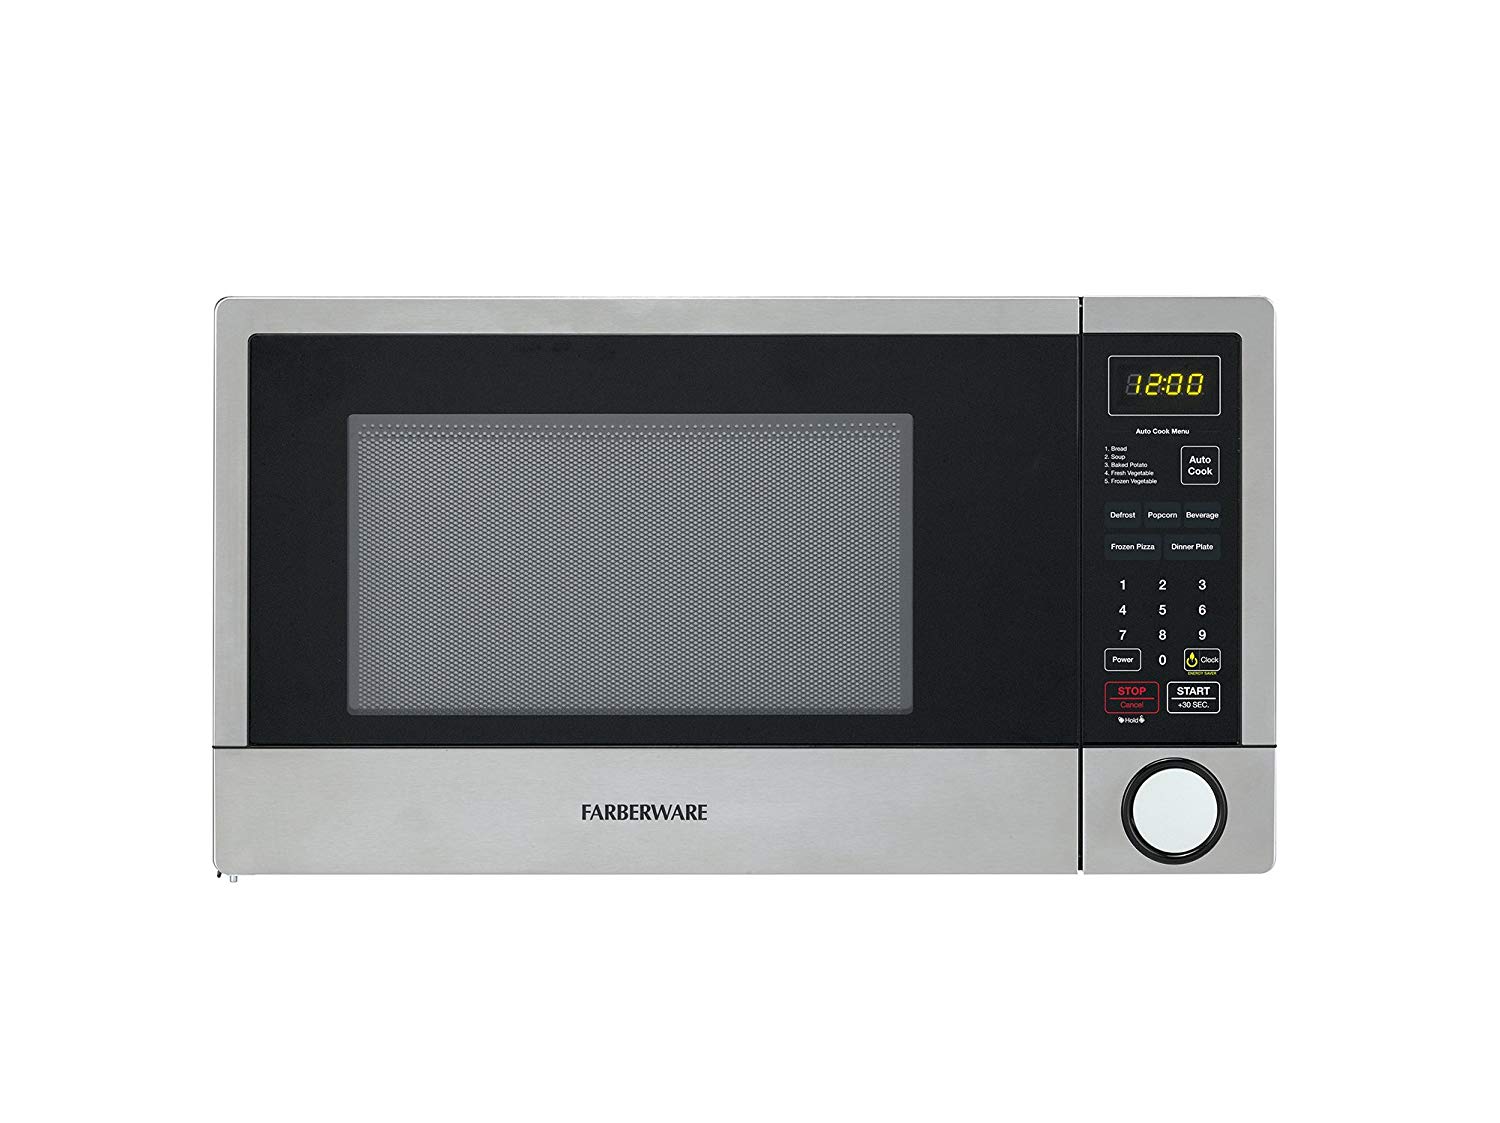 Farberware FMO11HBTBKI 1.1 Cubic Foot 1000 Watt Microwave Oven with CRS Technology Stainless Steel